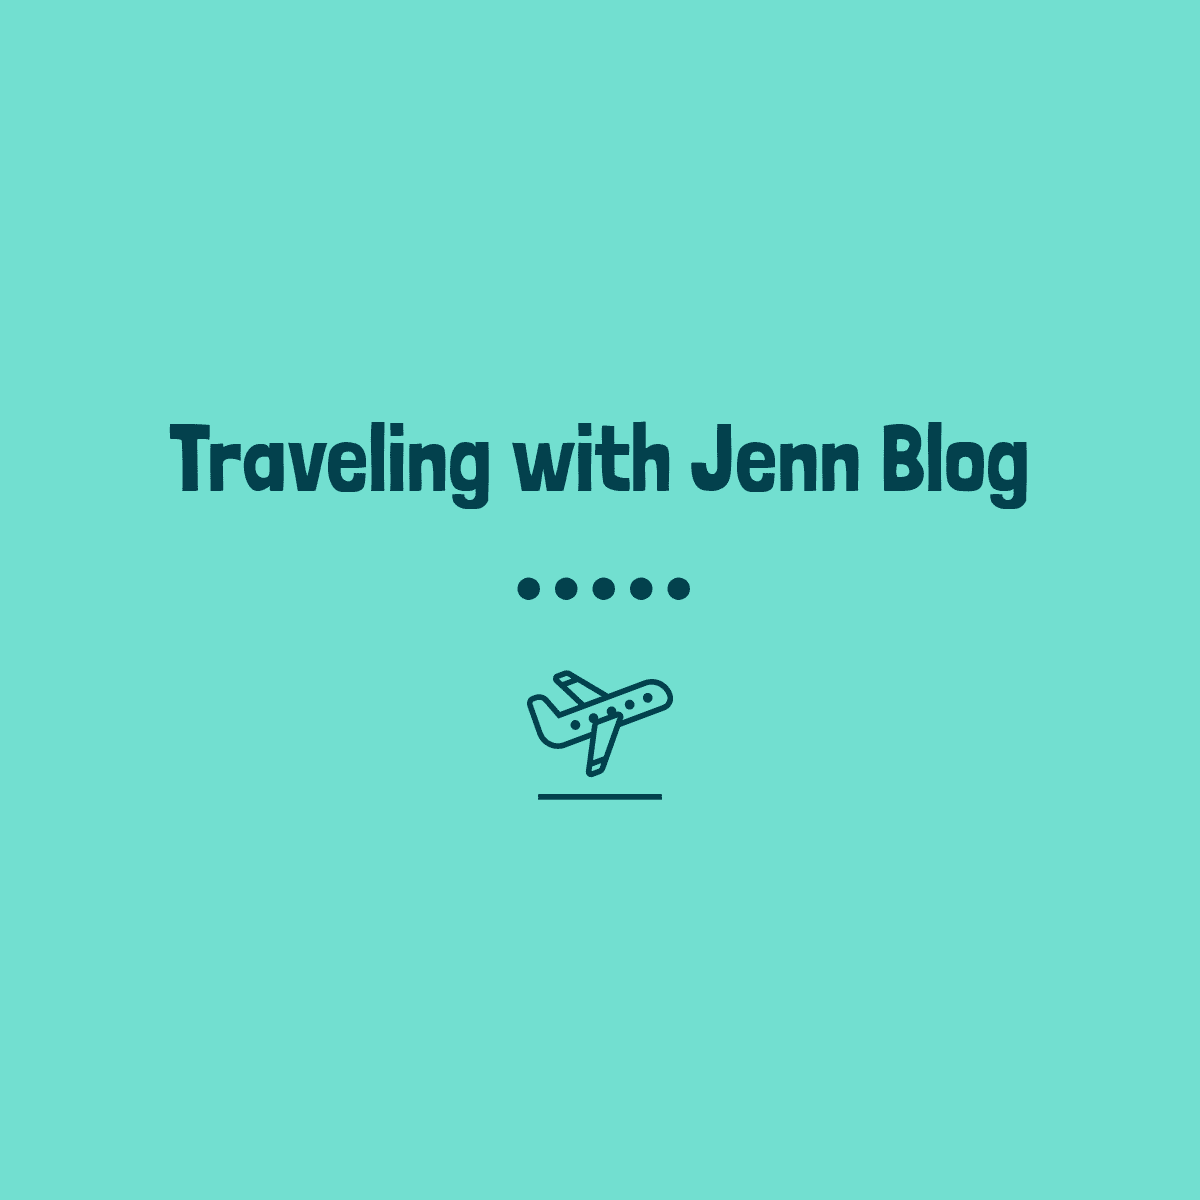 Traveling with Jenn